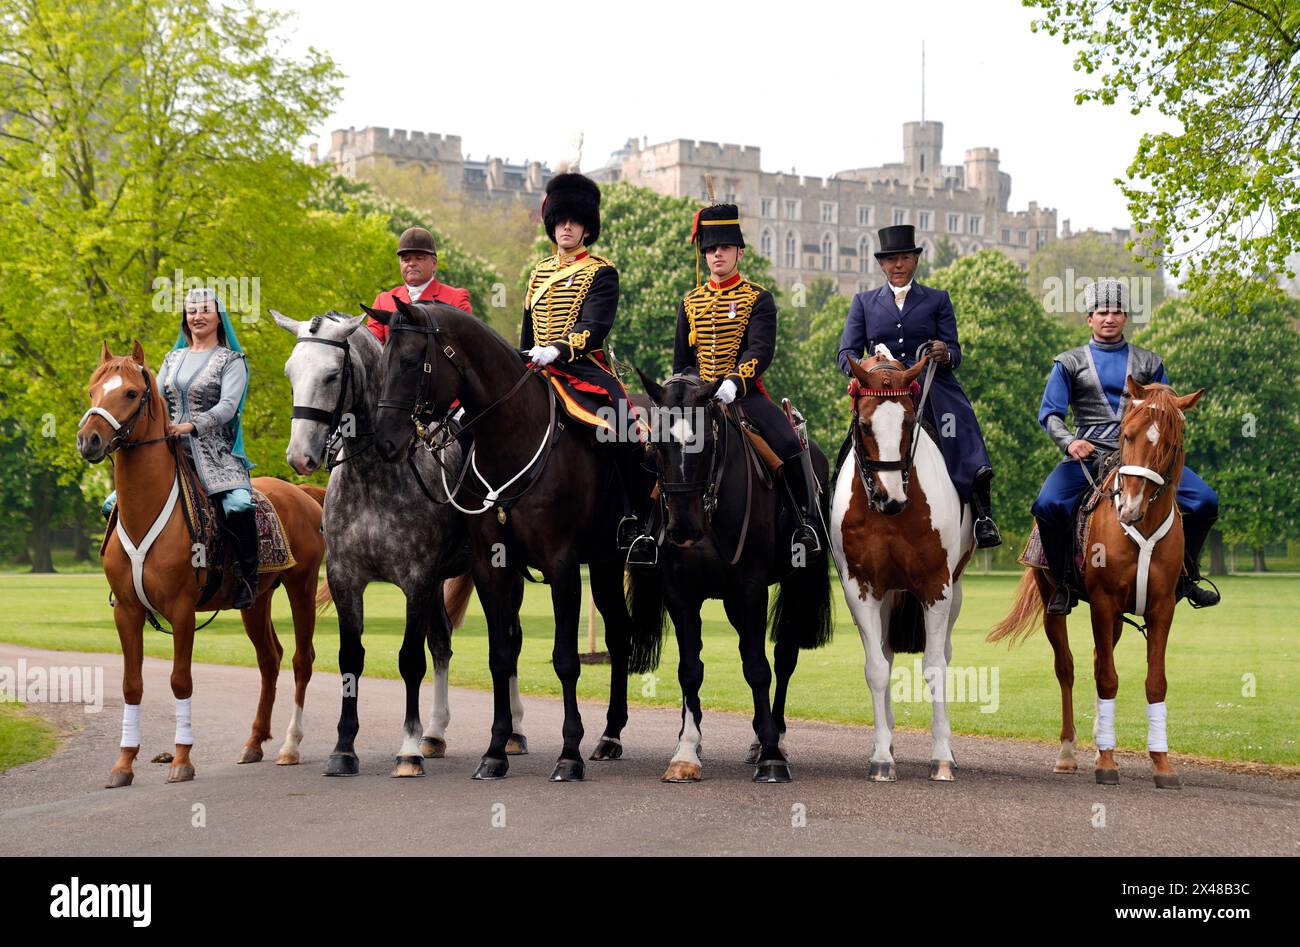 (Left to right) Khayalya Ahmadova riding Mil, part of the Equestrian Federation of Azerbaijan, Chris Hunnable riding Mrs I Shervington's Goosey Gander, Captain Whittingham riding Reggie and Gunner Martin riding Kernow of The Musical Drive of the King's Troop Royal Horse Artillery, Katie Jerram-Hunnable riding His Majesty the Kings's Sunbeam and Hasan Pashayev riding Sel of the Equestrian Federation of Azerbaijan during a photo call at the Royal Windsor Horse Show, Windsor. Picture date: Wednesday May 1, 2024. Stock Photo